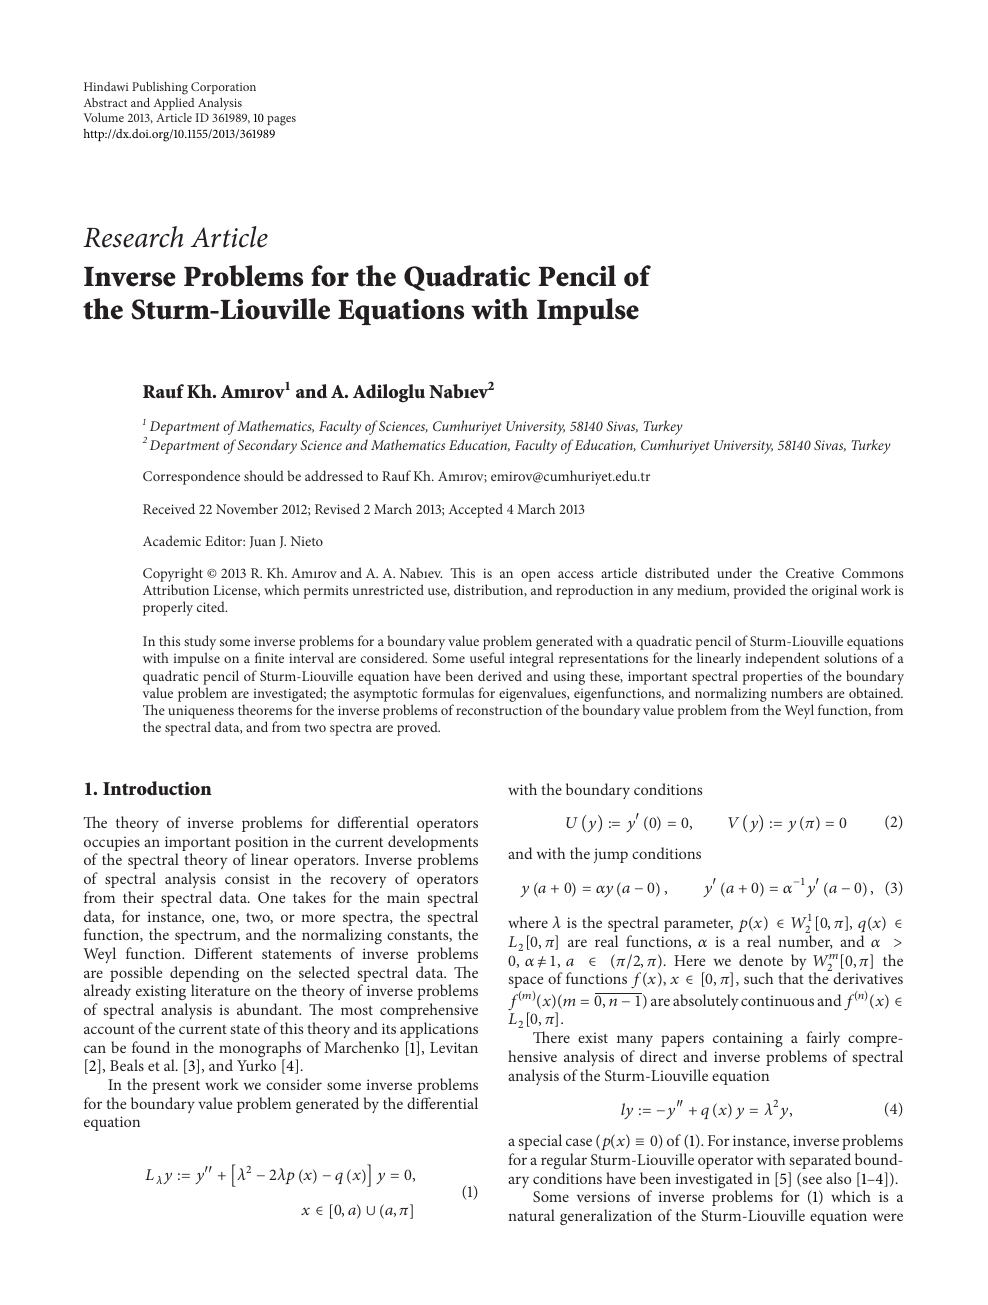 Inverse Problems For The Quadratic Pencil Of The Sturm Liouville Equations With Impulse Topic Of Research Paper In Mathematics Download Scholarly Article Pdf And Read For Free On Cyberleninka Open Science Hub